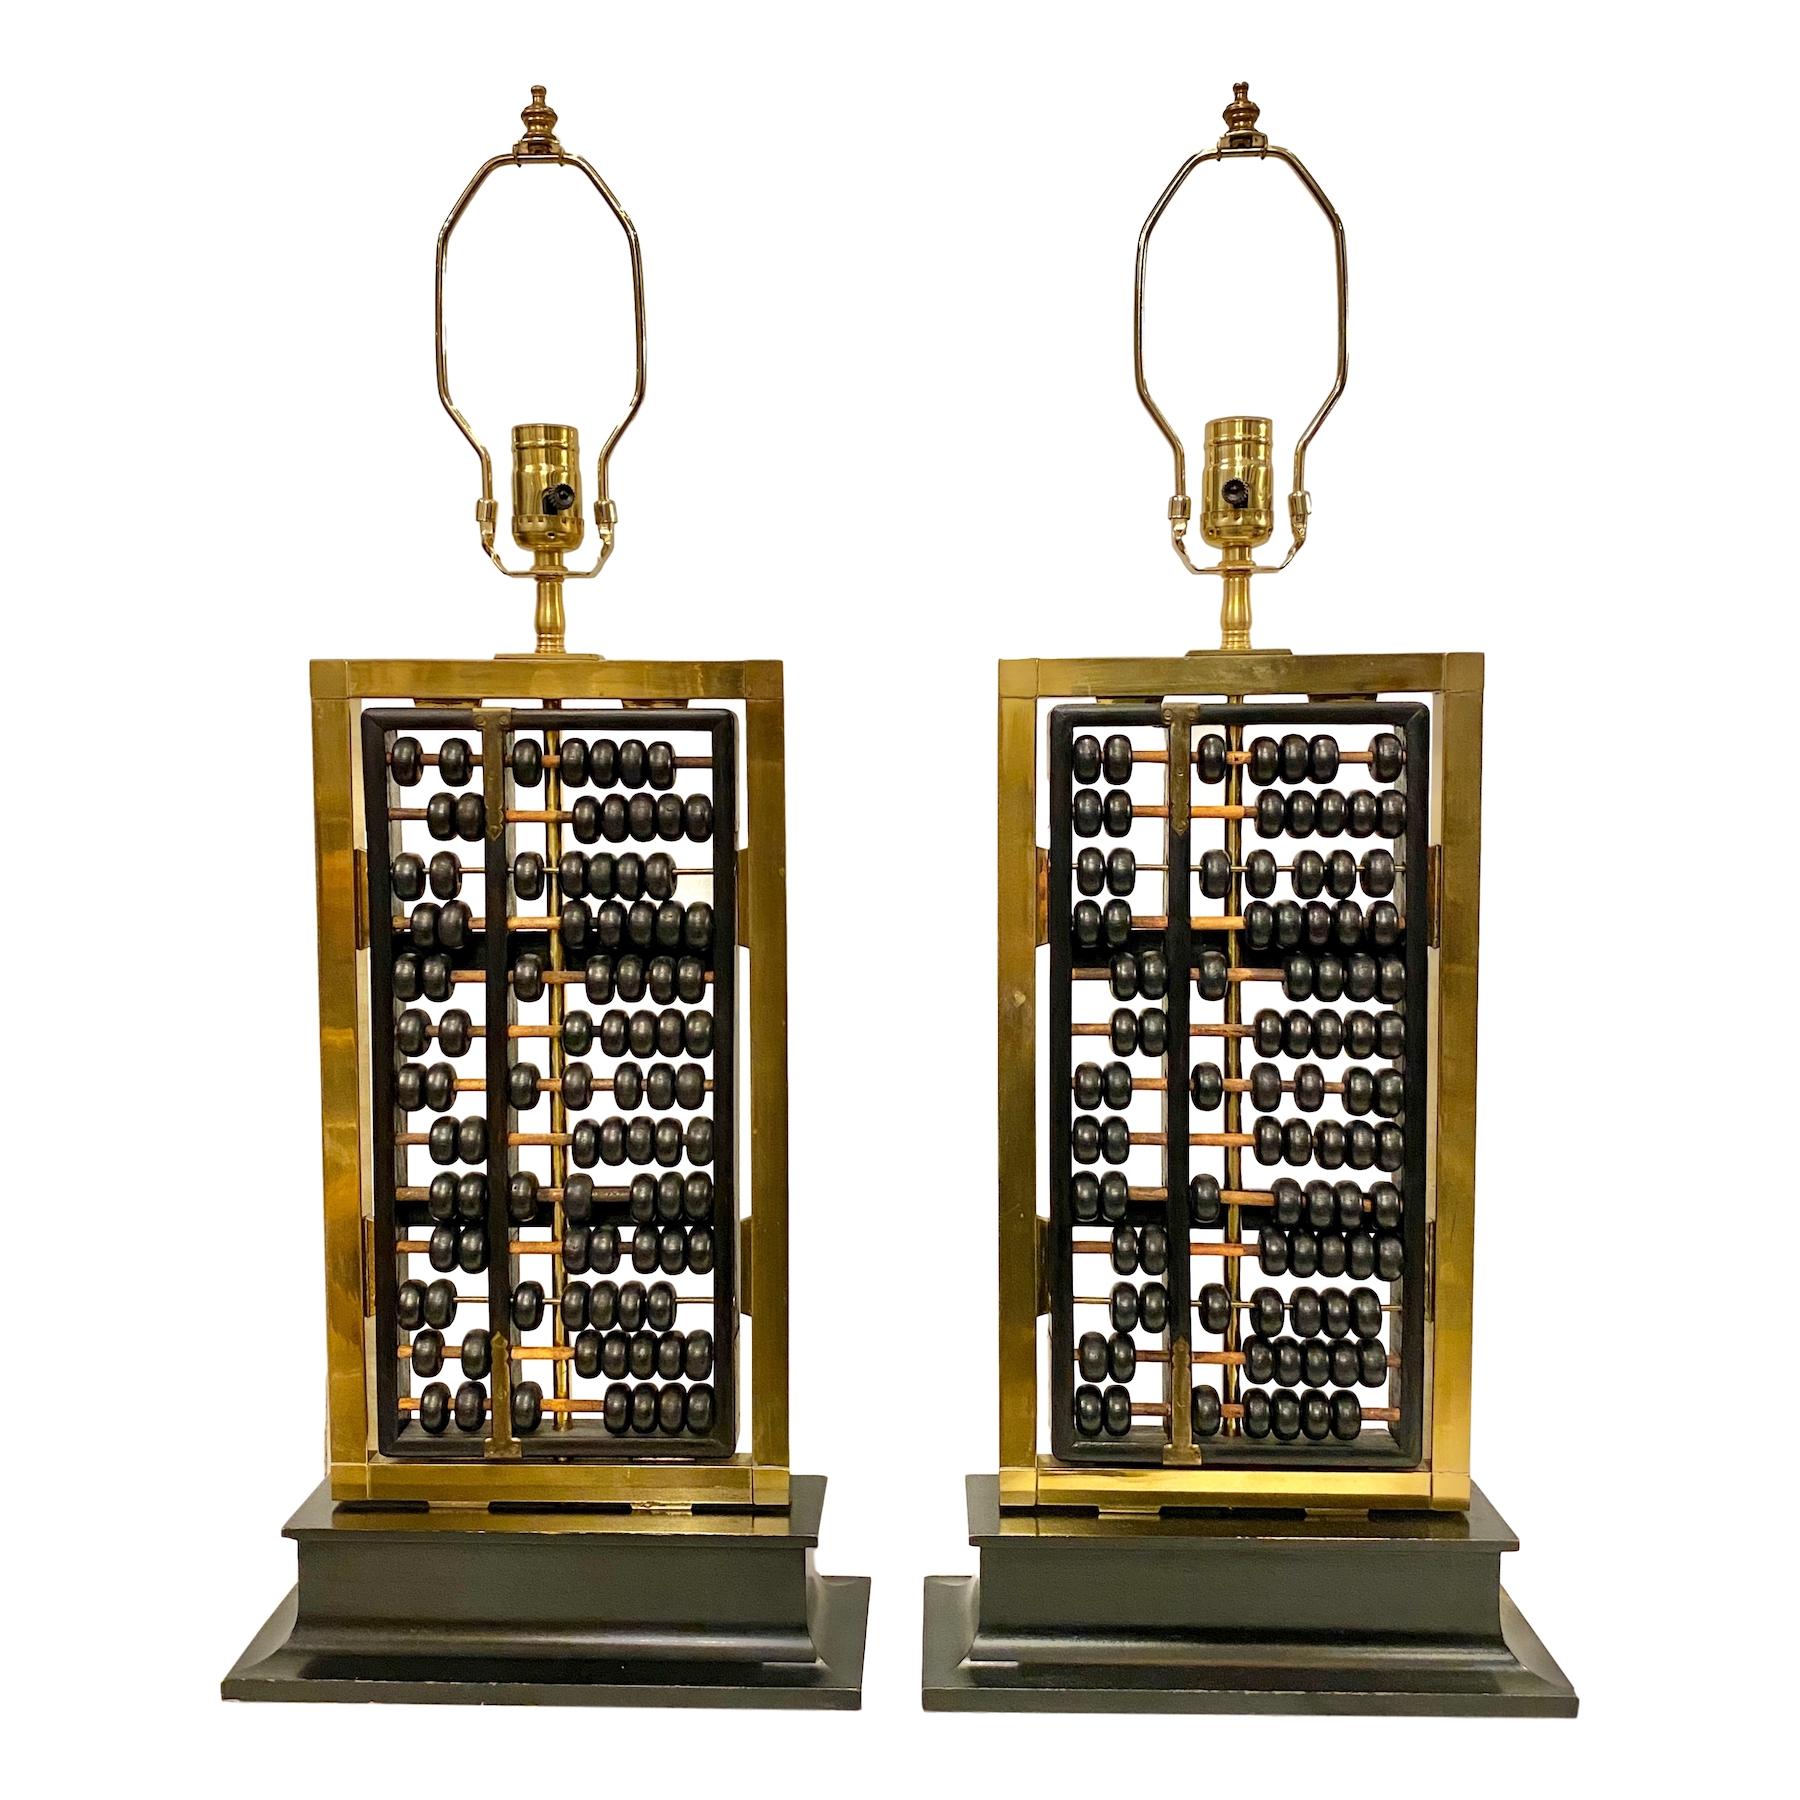 Pair of 1940s Chinese abacus mounted as lamps with bronze details.

Measures: Height of body 20